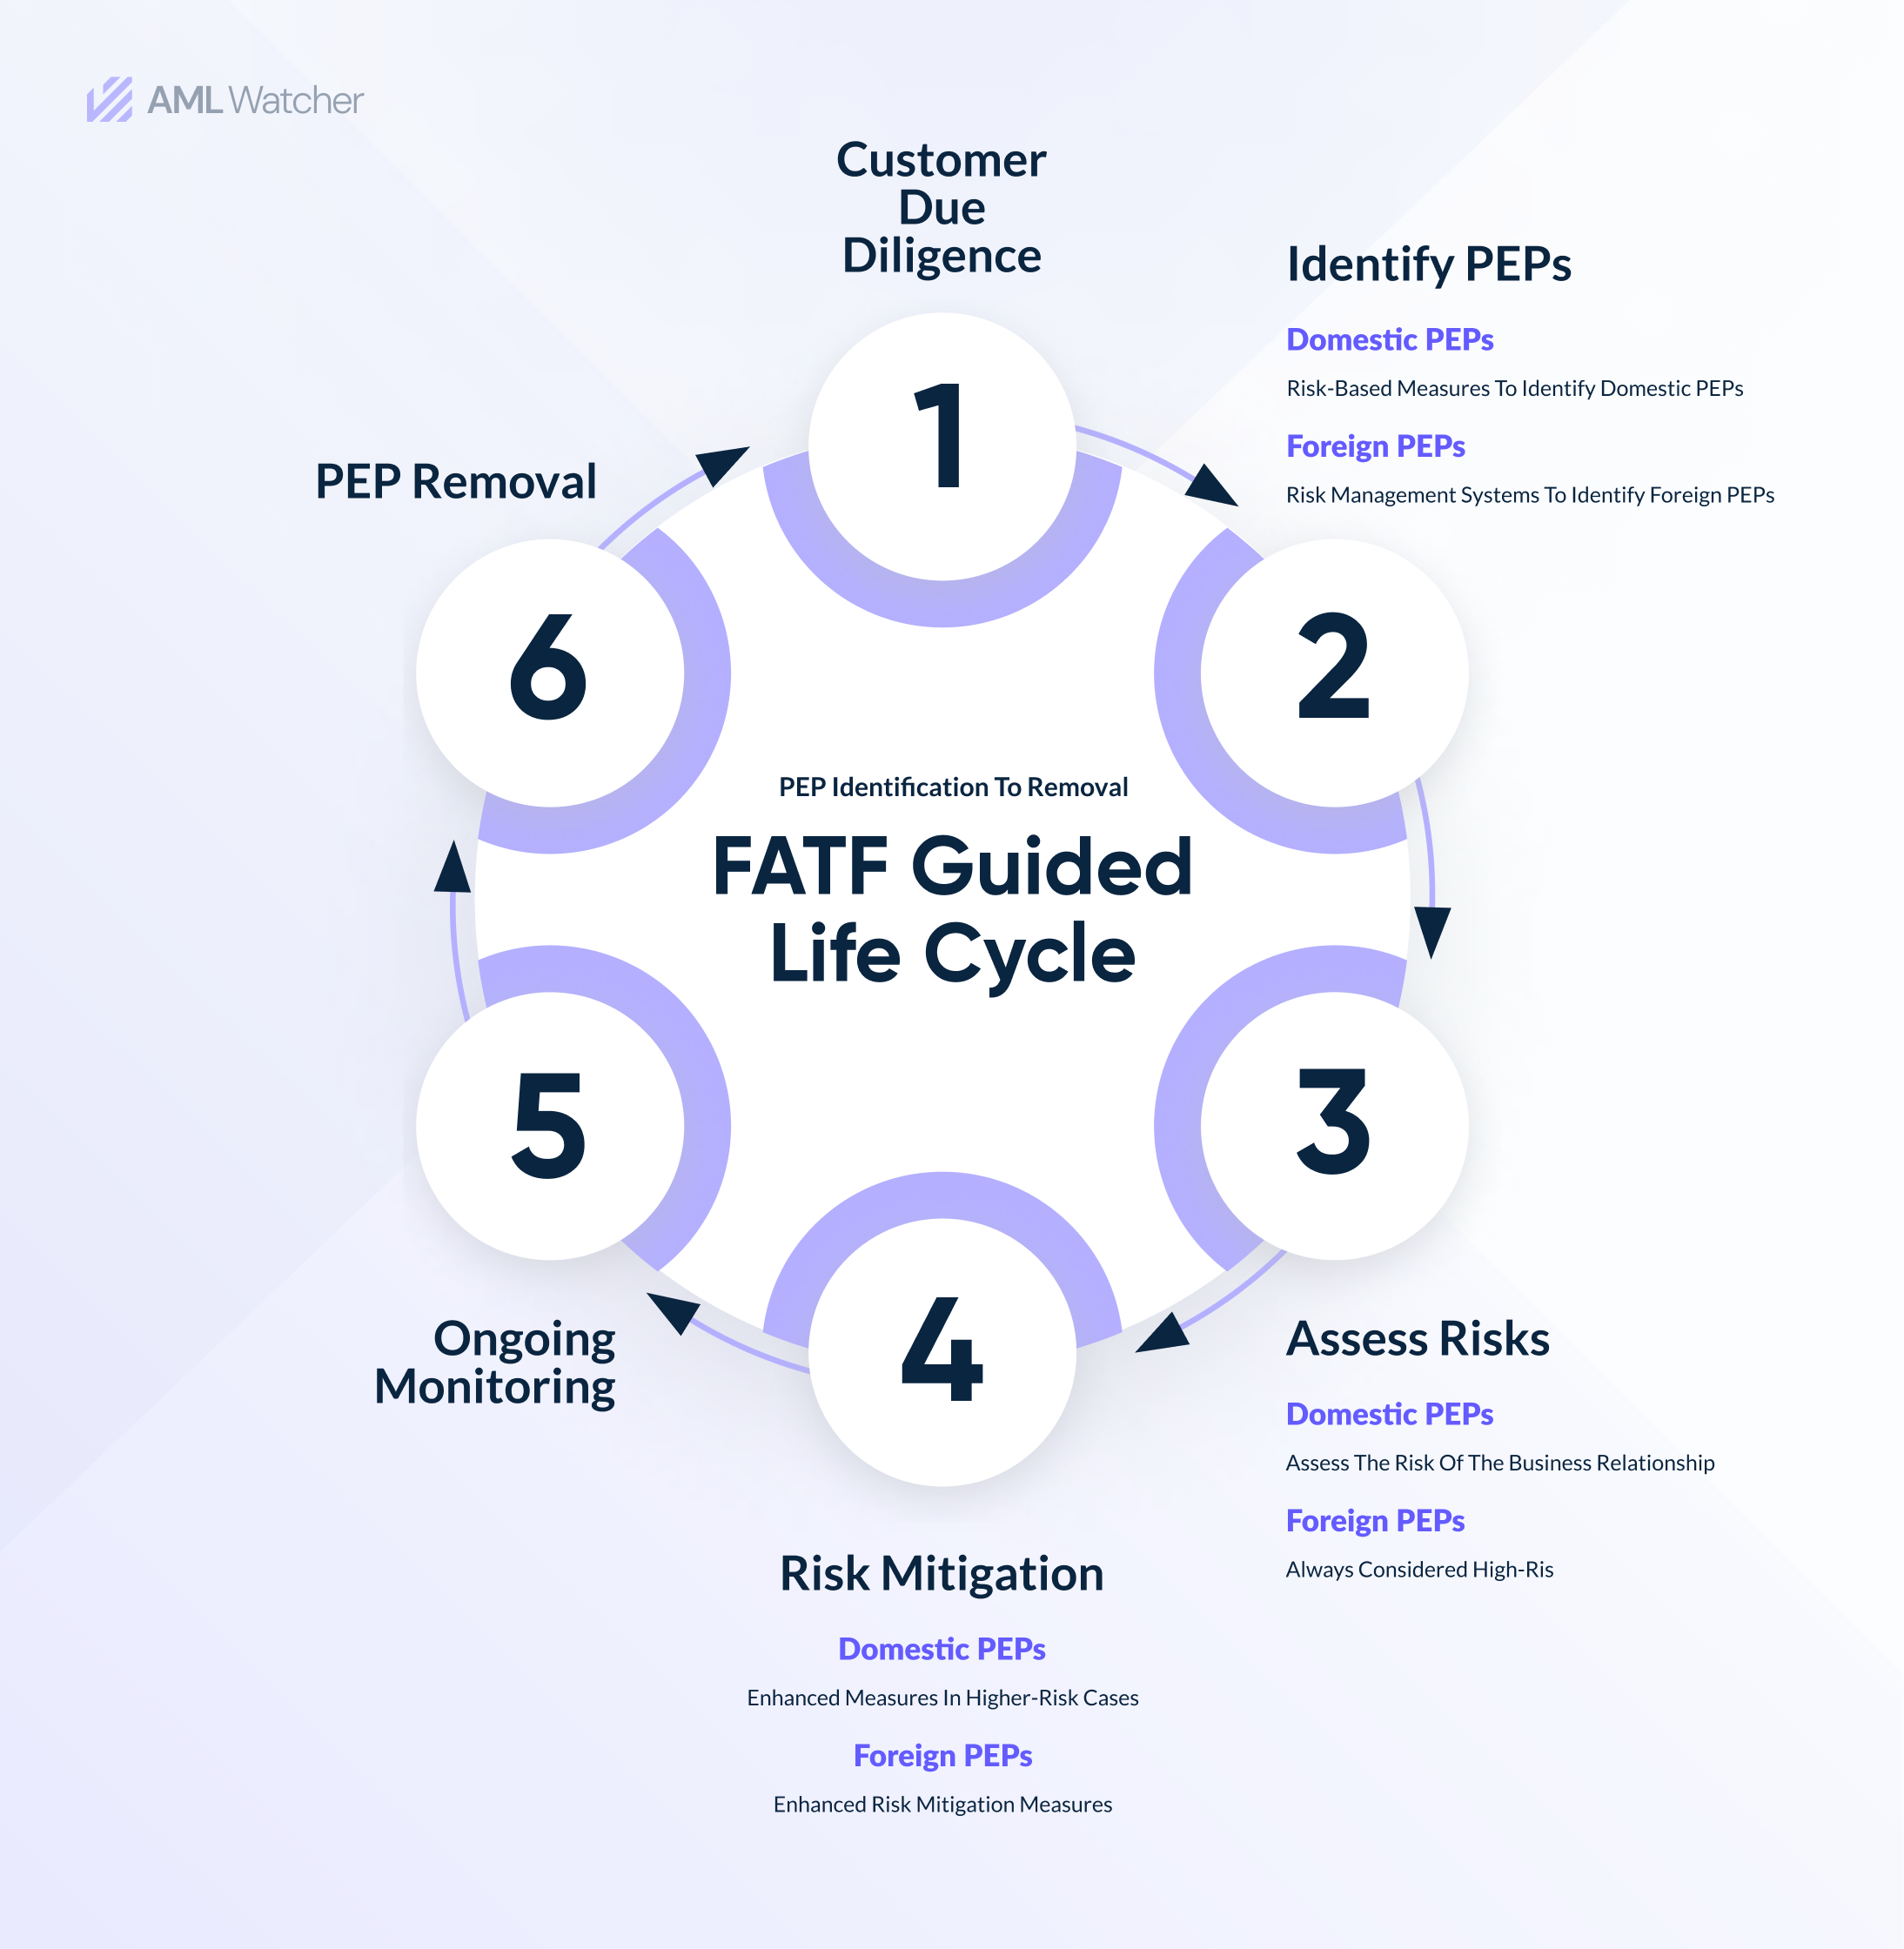 the featured image displays a complete cycle of PEP compliance including PEP identification, risk classification, risk mitigation, and declassification.